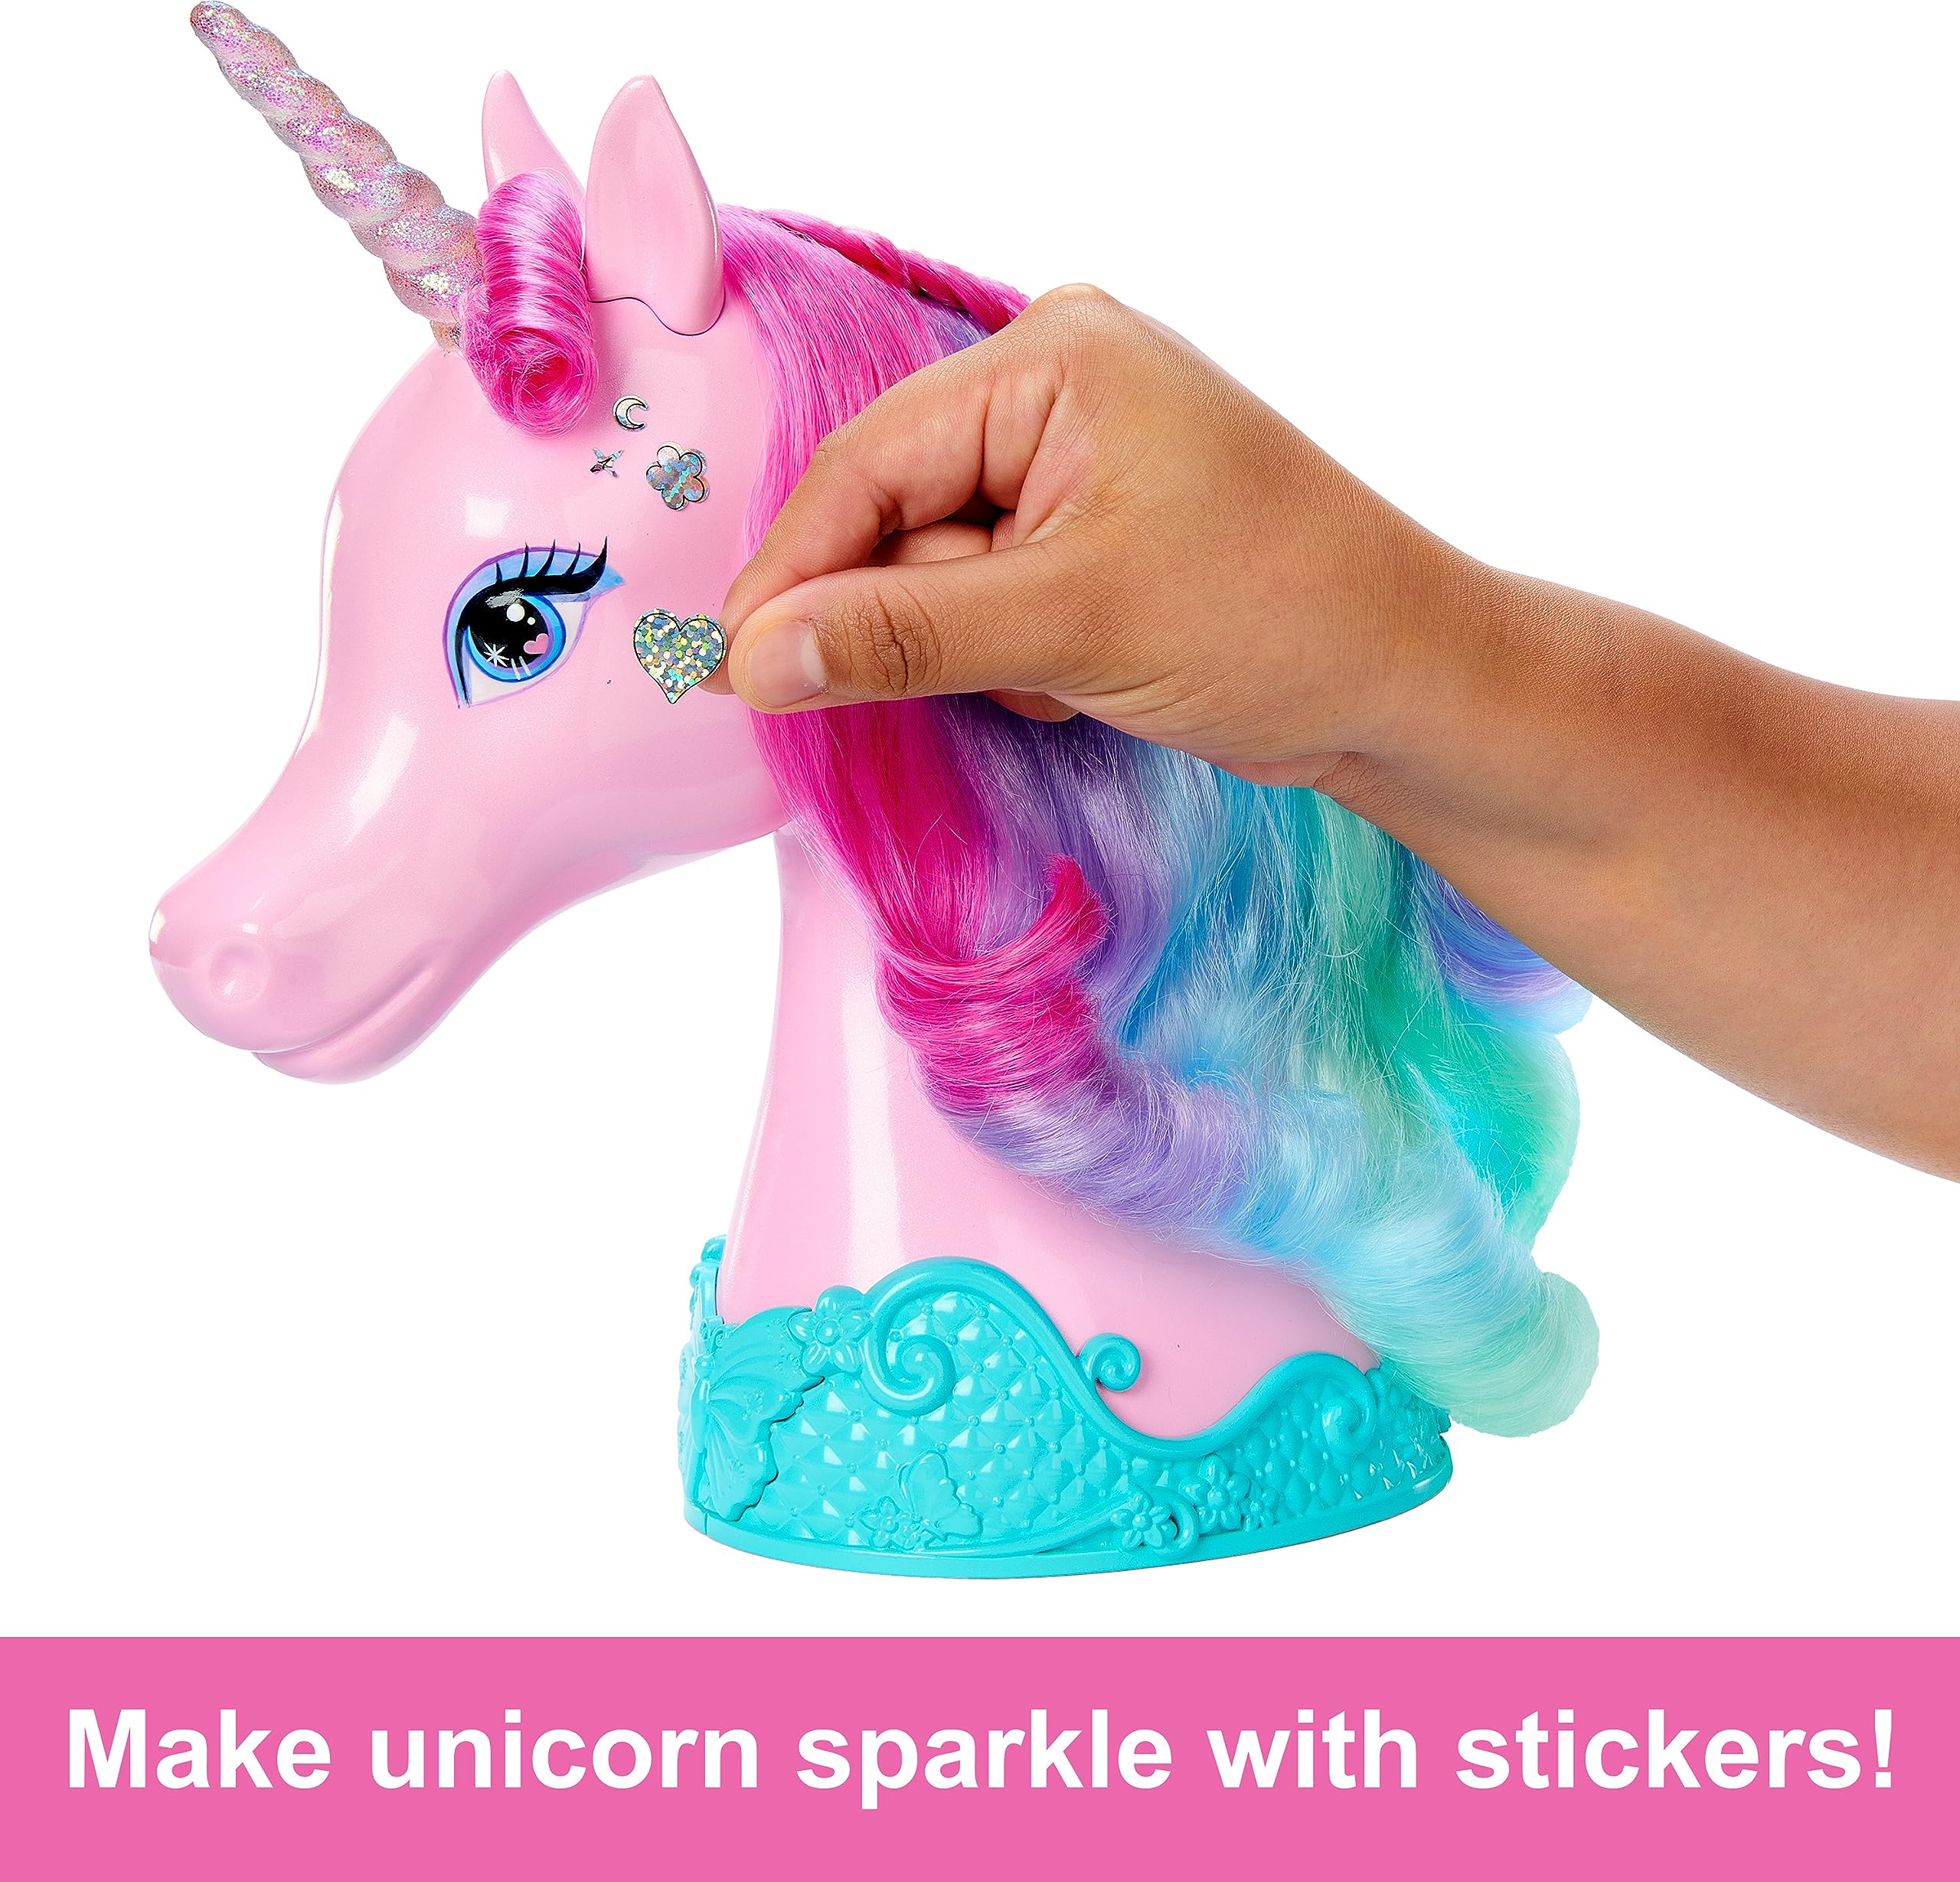 Barbie Unicorn Toys, Styling Head with Colorful Mane of Fantasy Hair, Styling Accessories & Shimmer Stickers